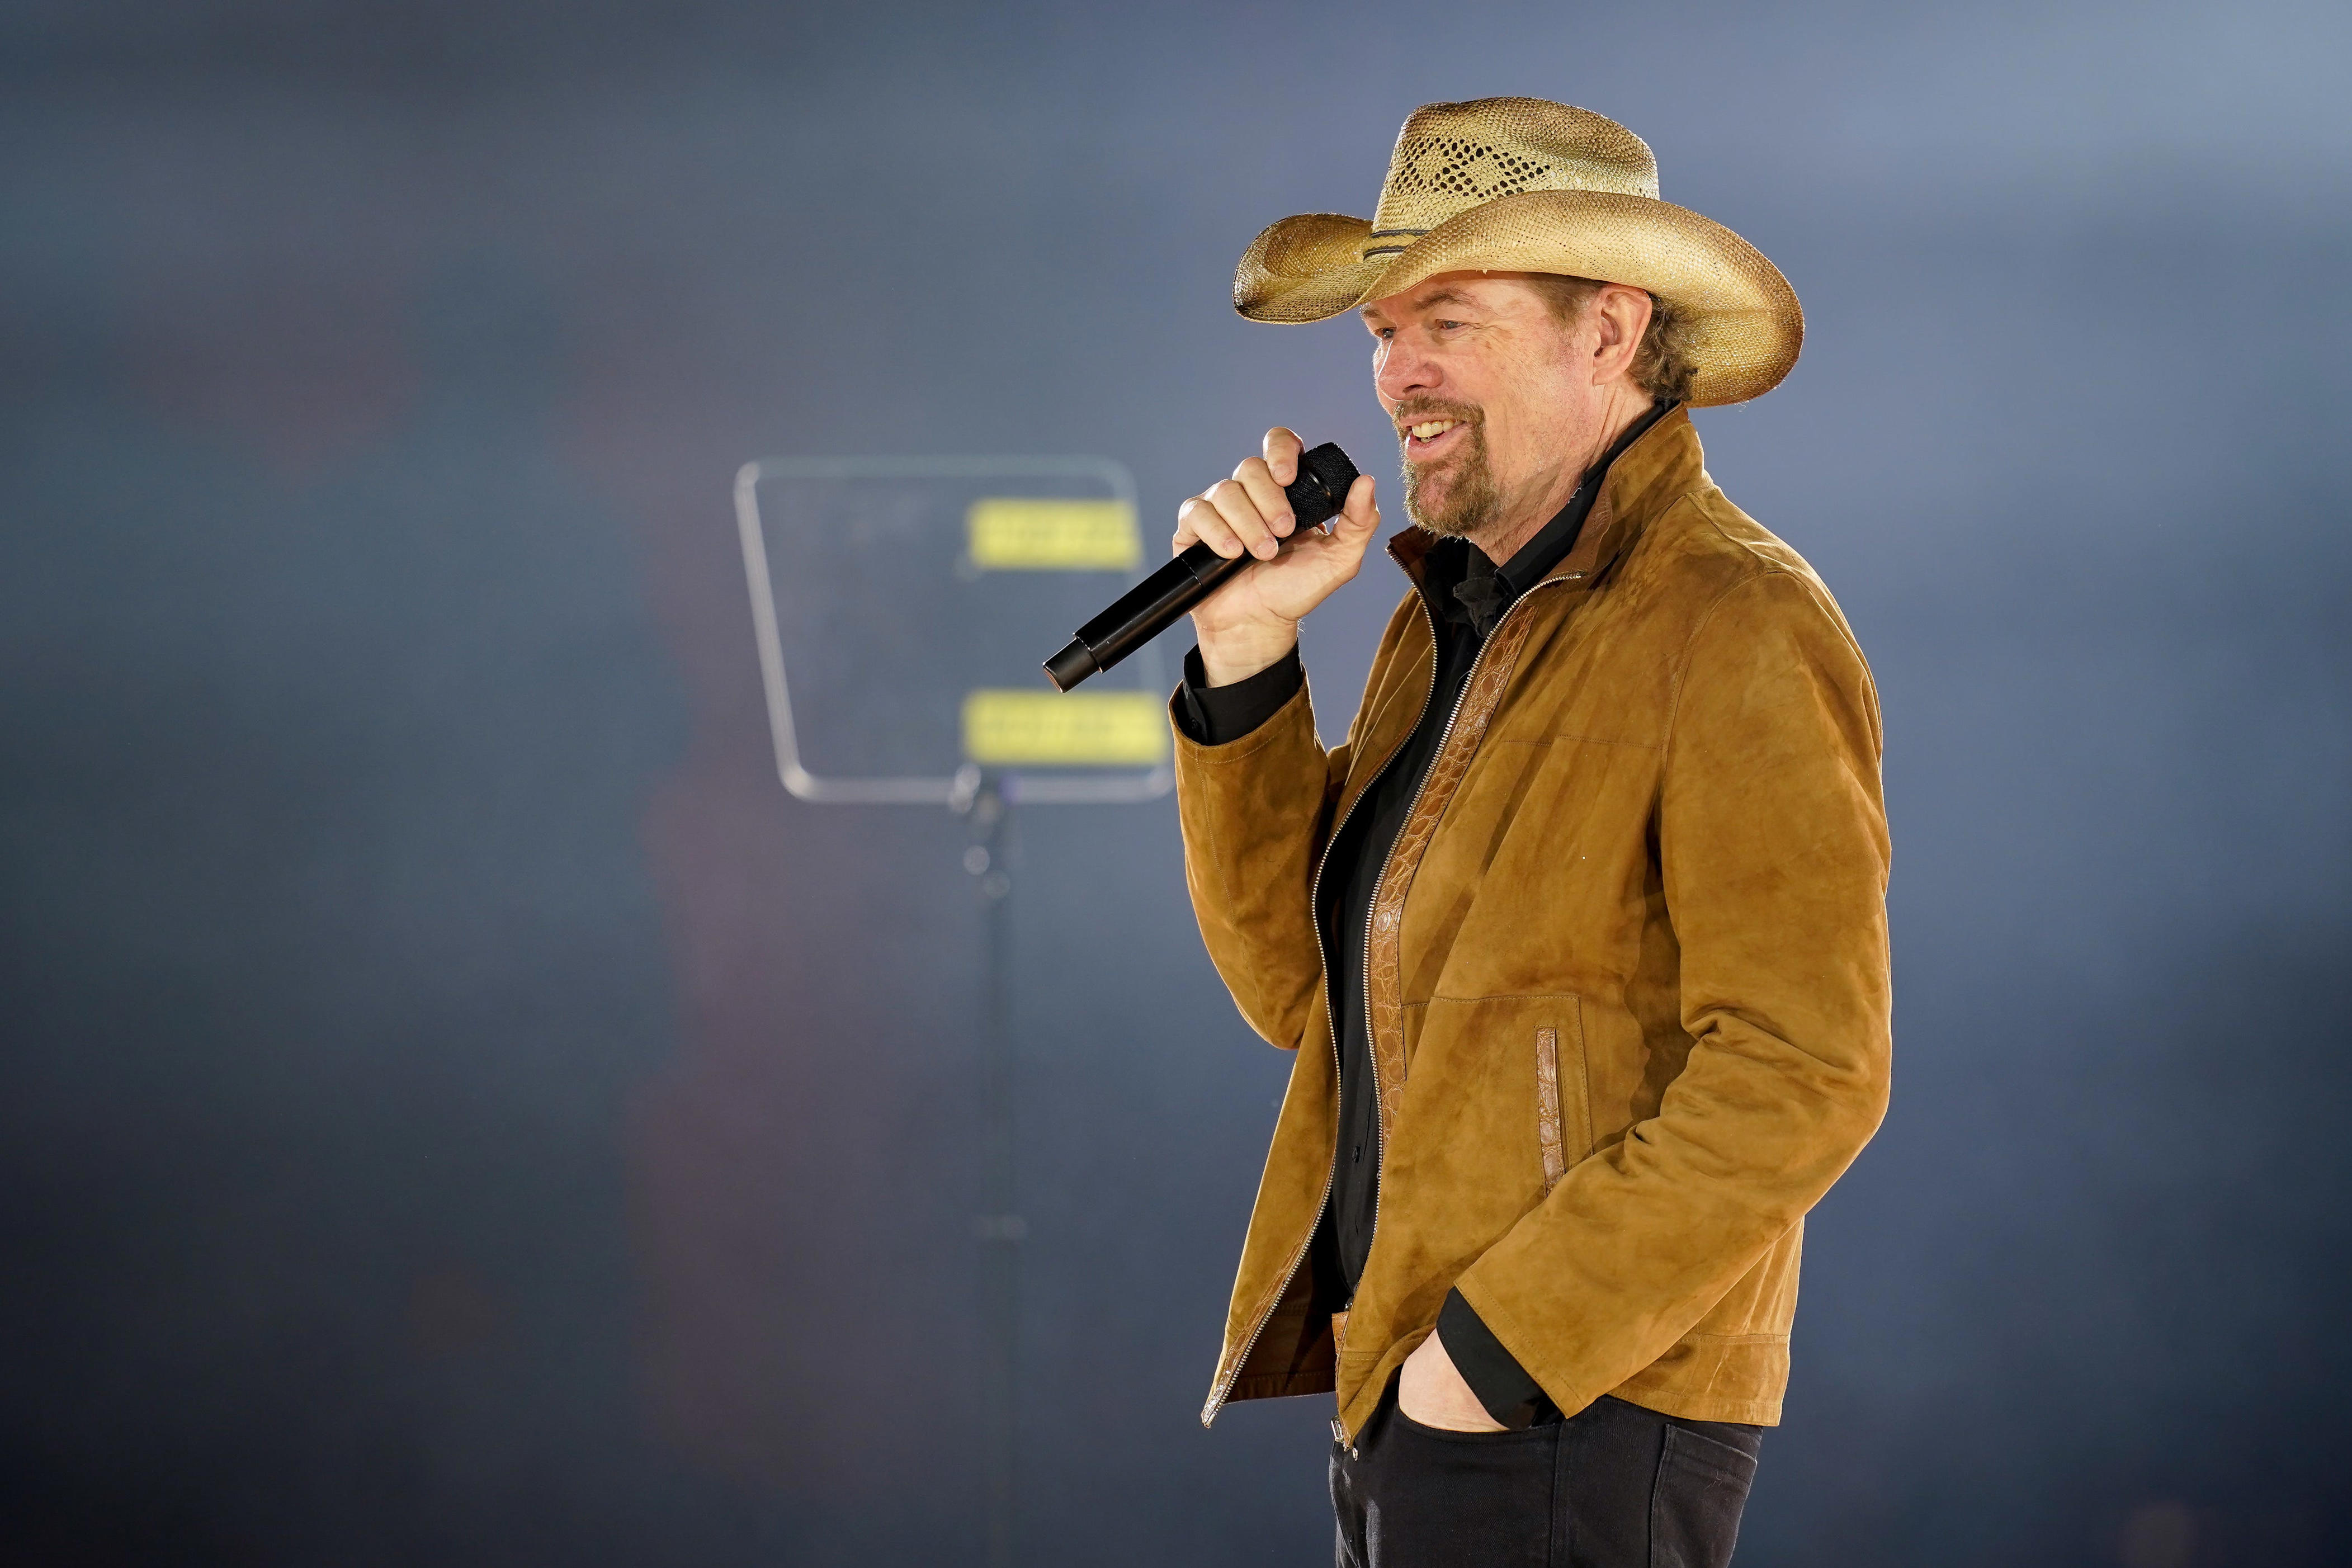 toby keith dies after stomach cancer battle: stephen colbert recalls 'improbable' friendship